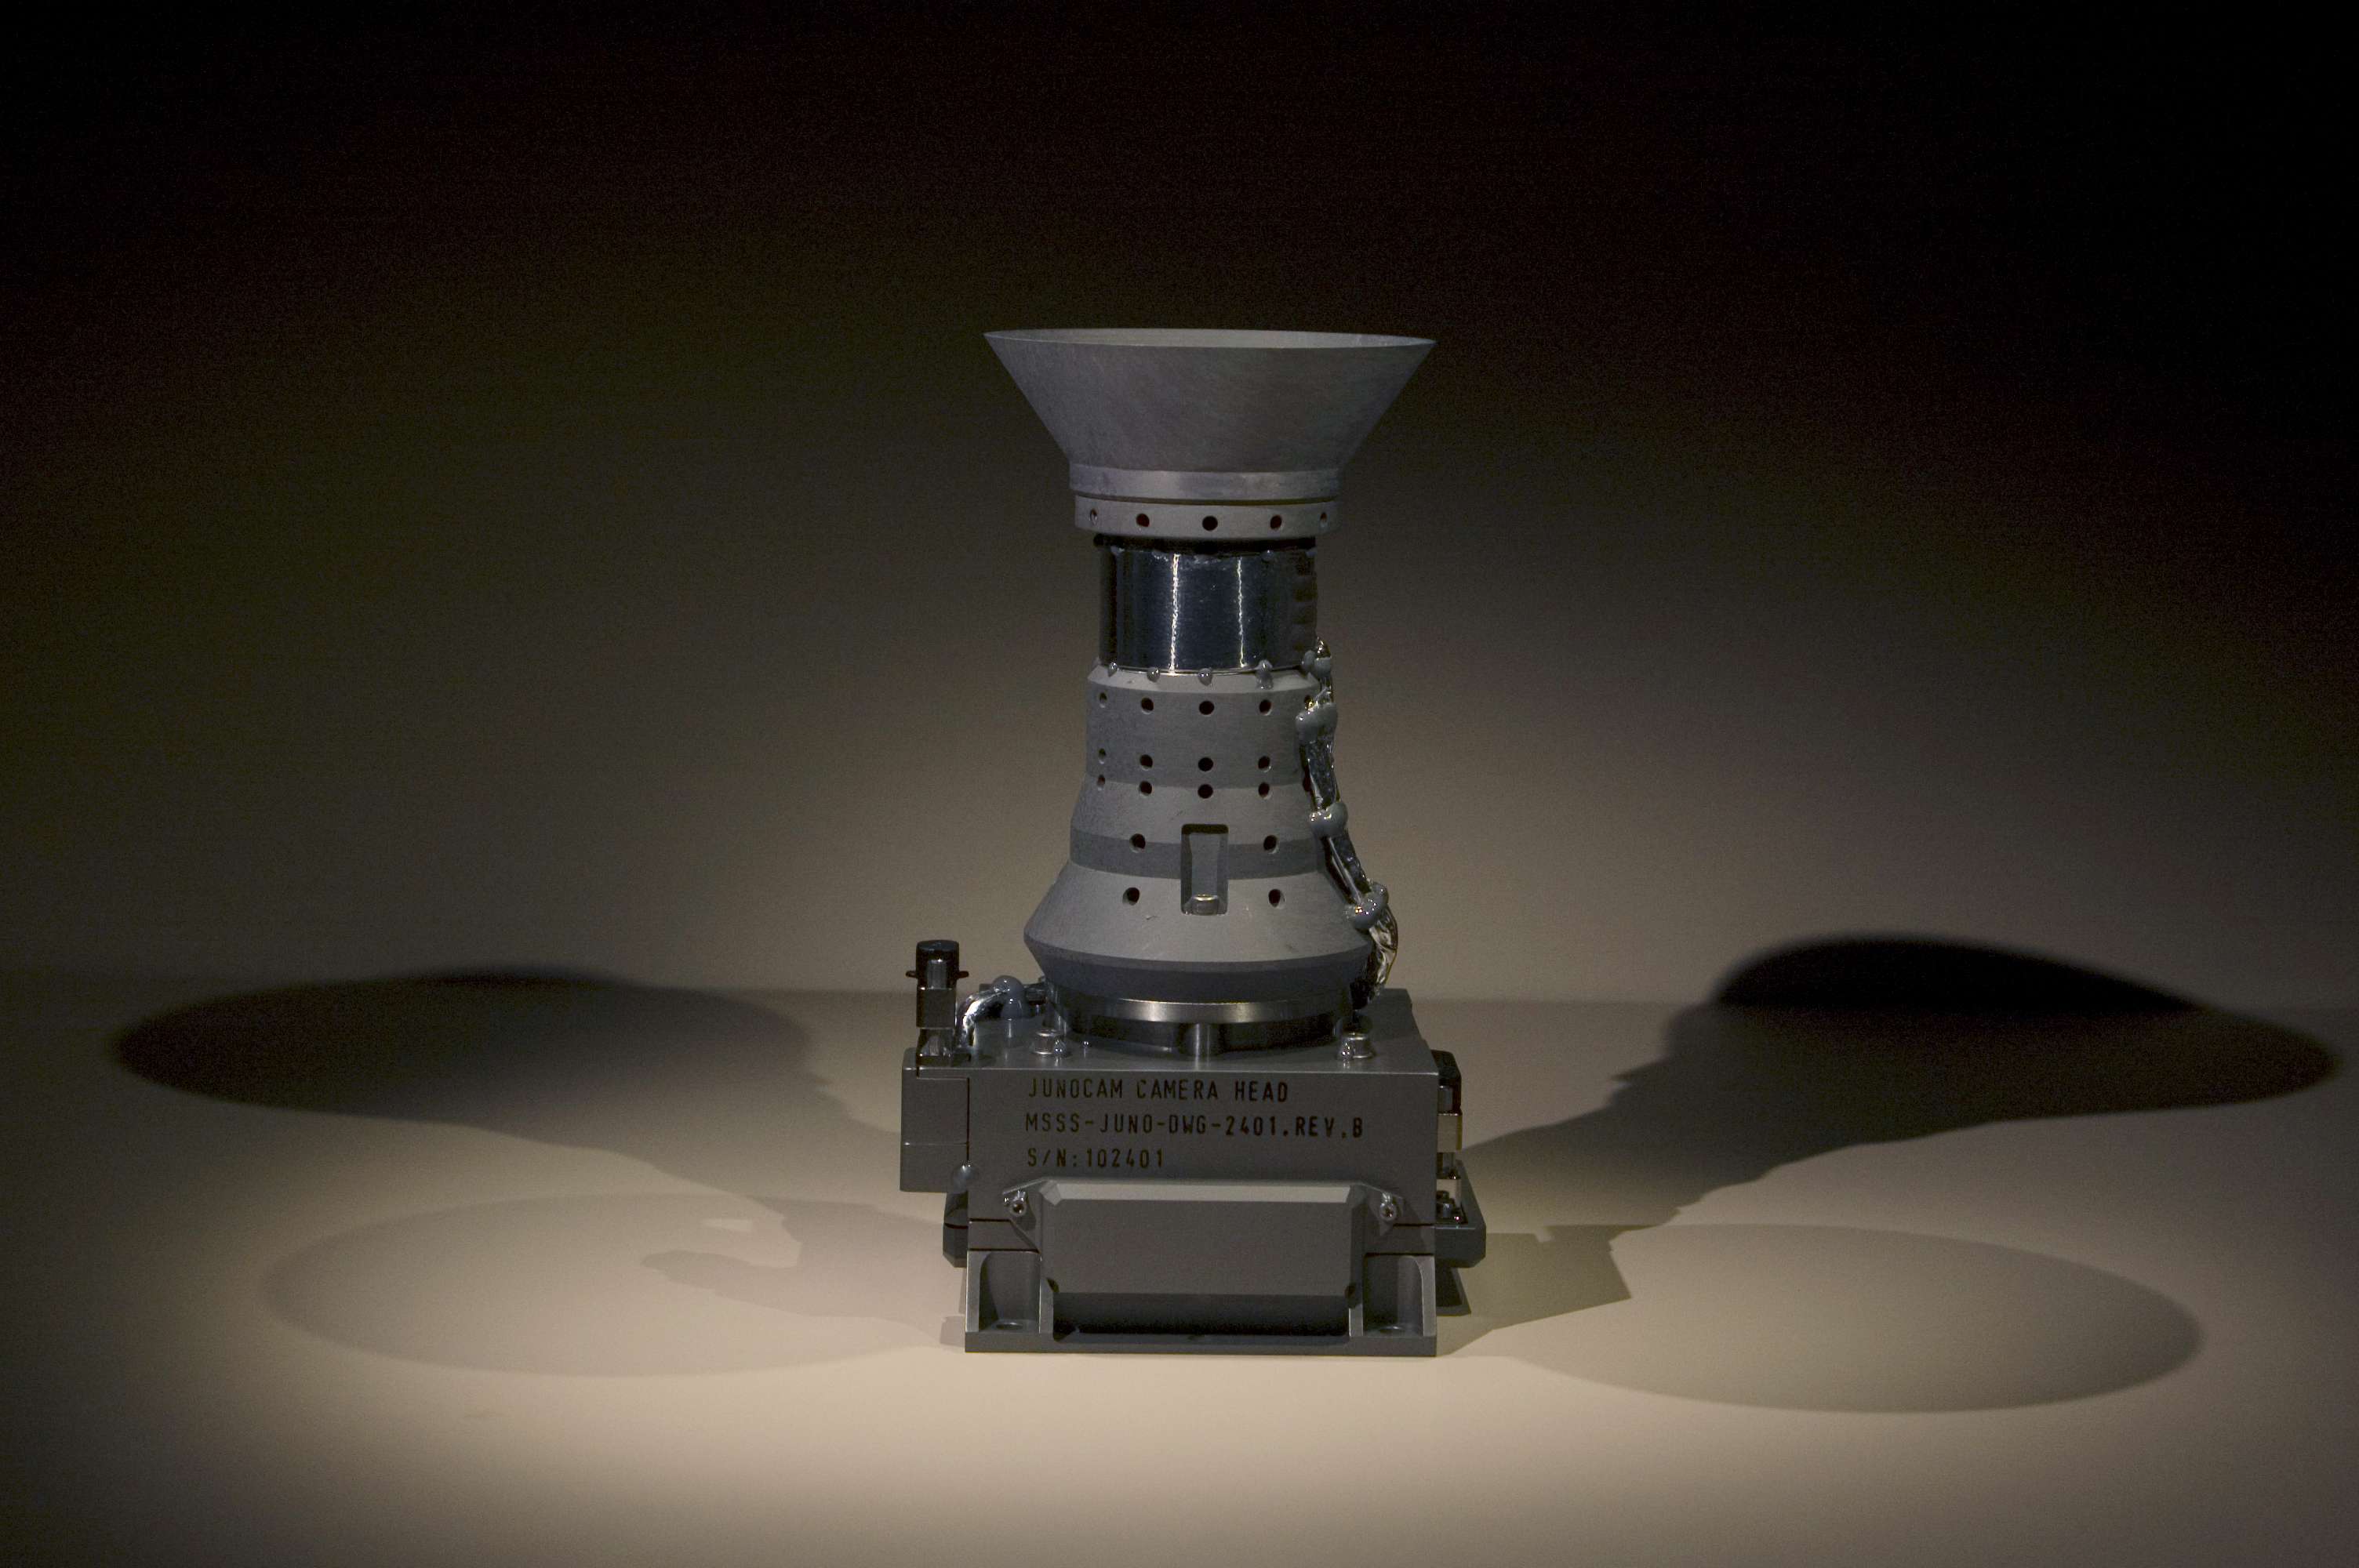 The silver-colored JunoCam camera head sits on a tan table. The cameras lens points up. The camera is sitting on a base inscribed with the name of the camera and some other letters and numbers.